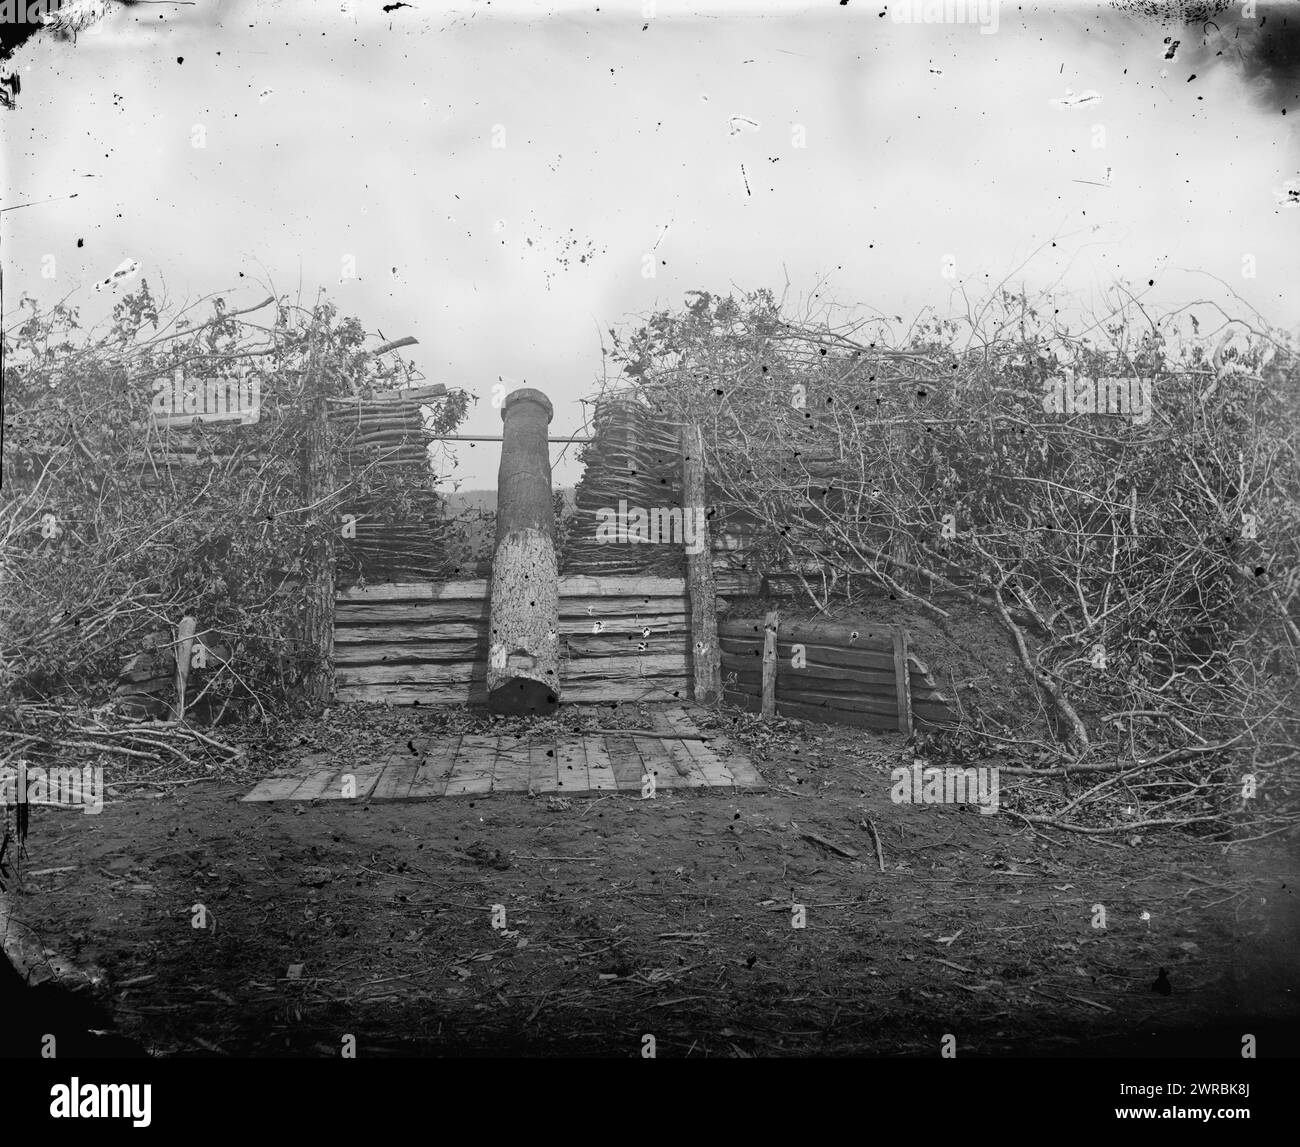 Centreville, Virginia. Confederate fort with Quaker gun, Barnard & Gibson, photographer, 1862 Mar., United States, History, Civil War, 1861-1865, Glass negatives, 1860-1870, 1 negative: glass, wet collodion Stock Photo